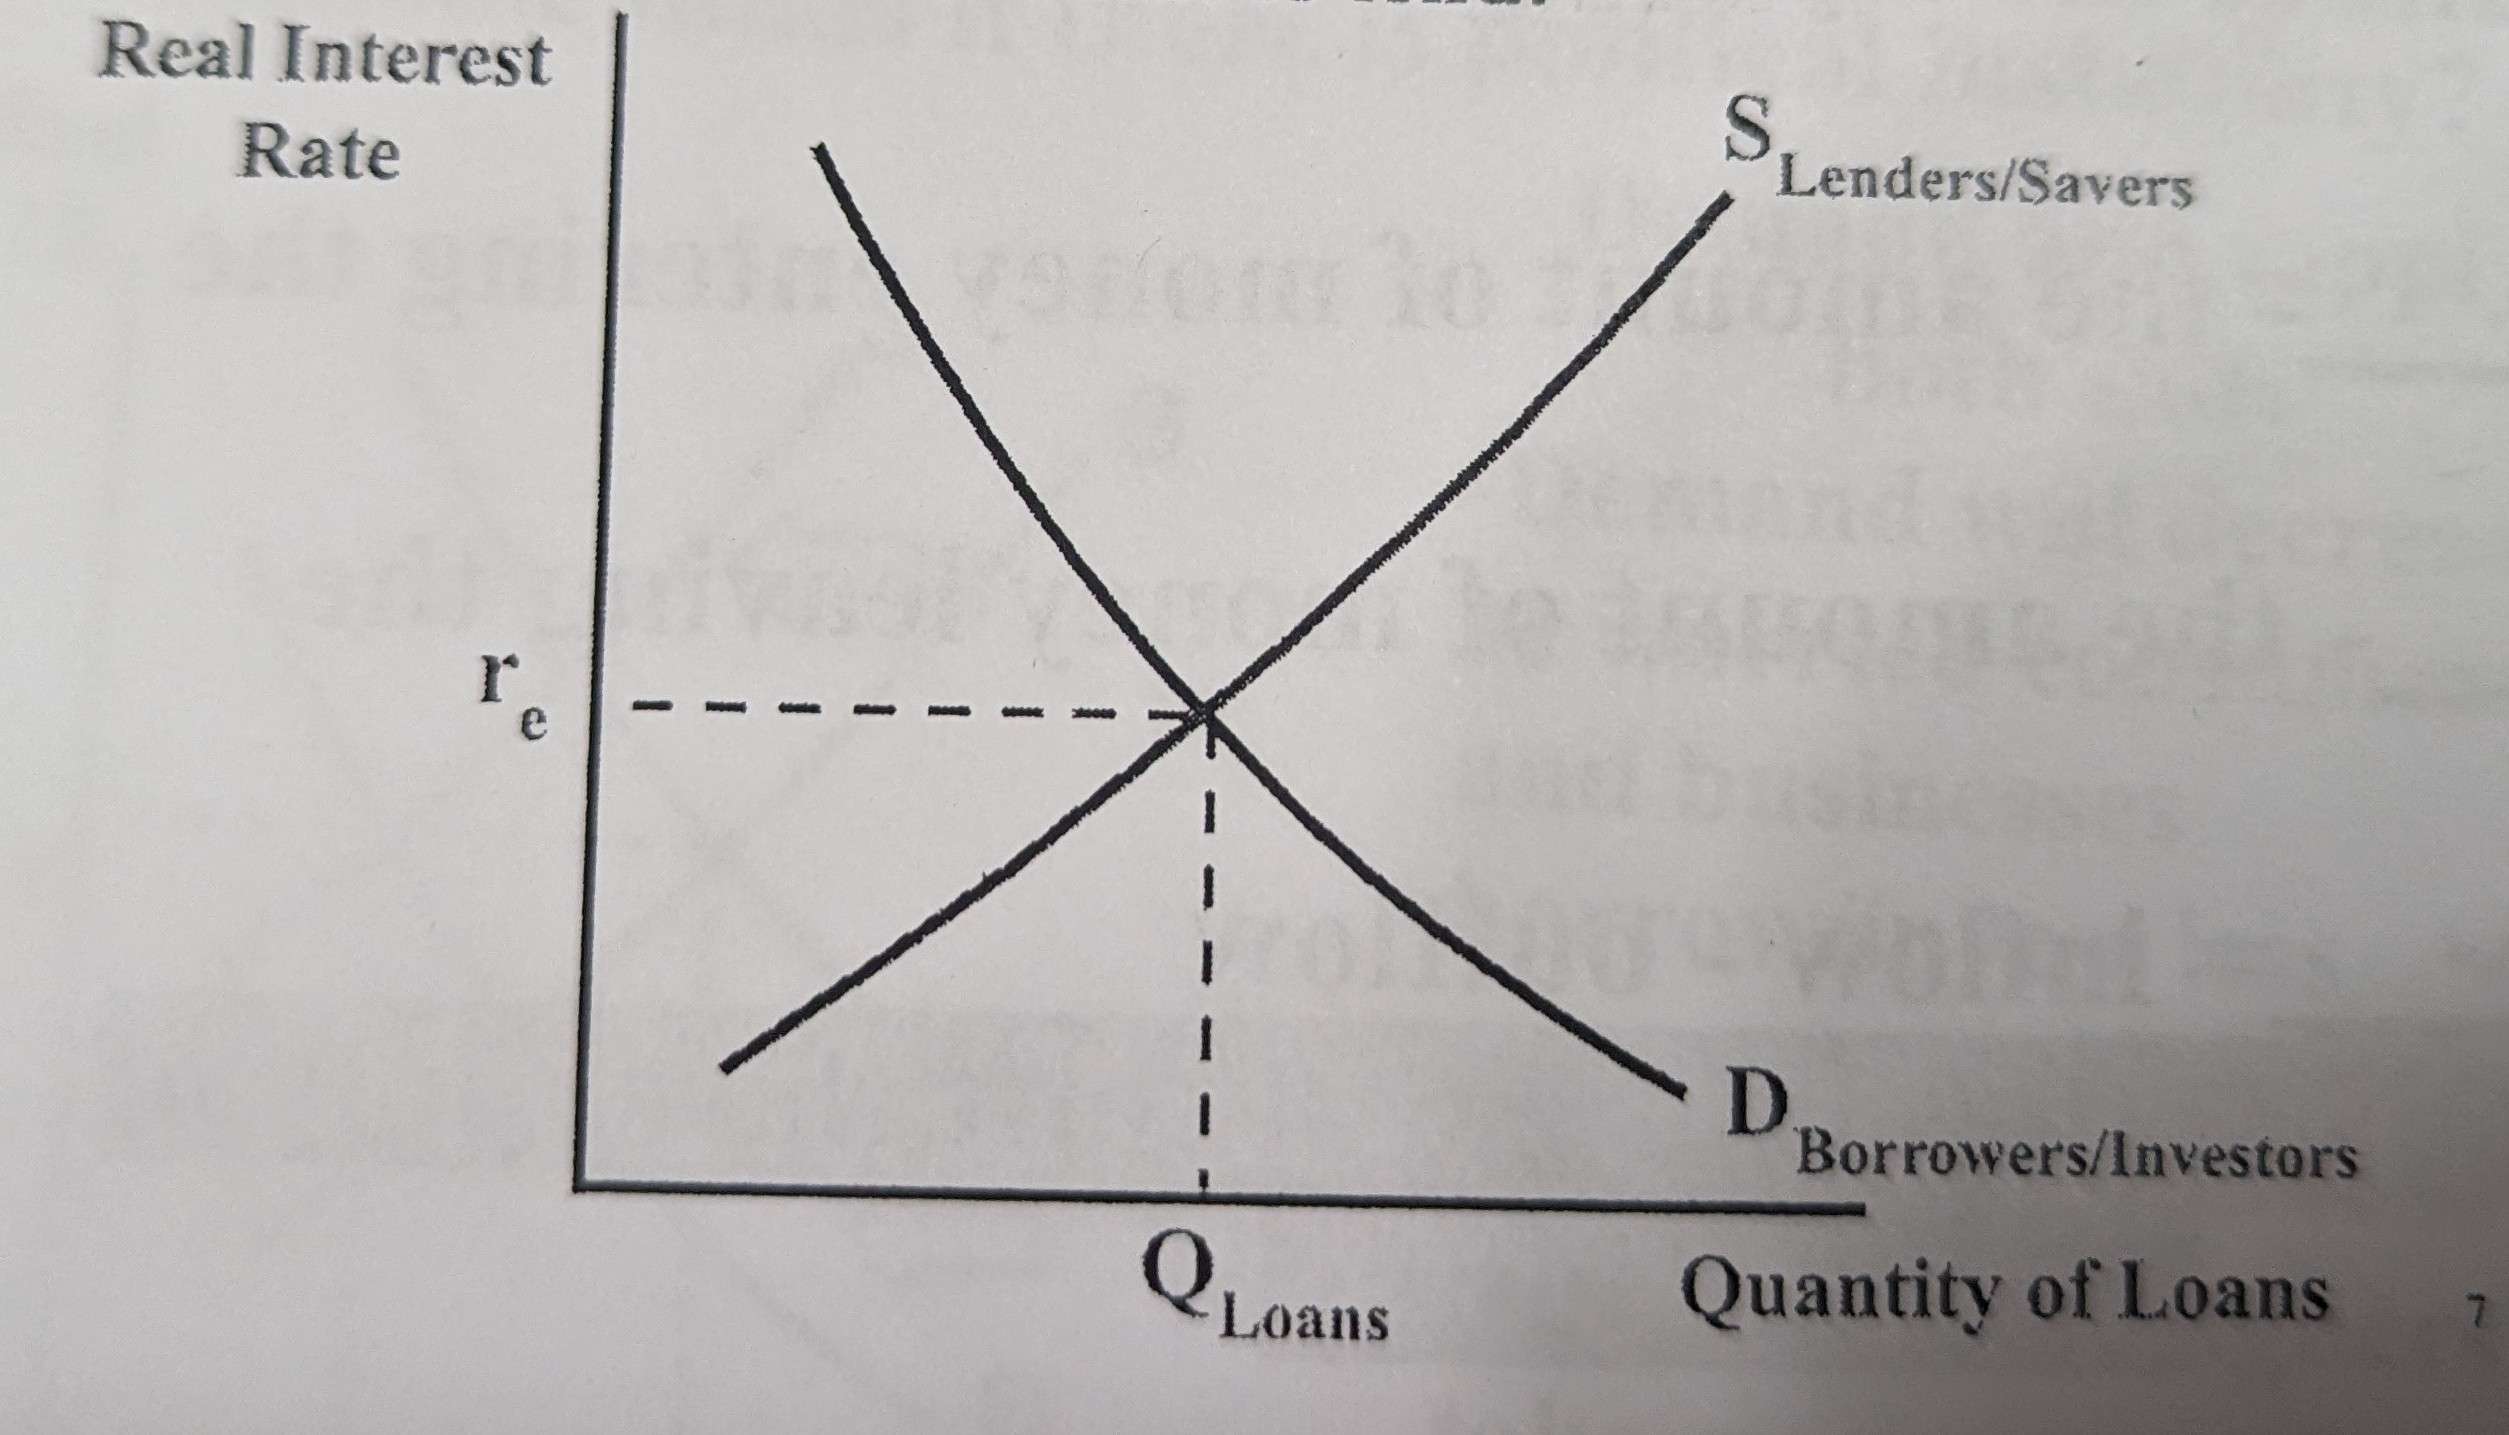 <ul><li><p>Shows the supply and demand of loans and shows the equilibrium real interest rate</p></li><li><p>At the equilibrium real interest rate the amount borrowers want to borrow equals the amount lenders want to lend</p></li><li><p>There is an <strong>inverse relationship</strong> between real interest rate and quantity loans demanded</p></li><li><p>There is an <strong>direct relationship</strong> between real interest rate and quantity loans supplied</p></li></ul>